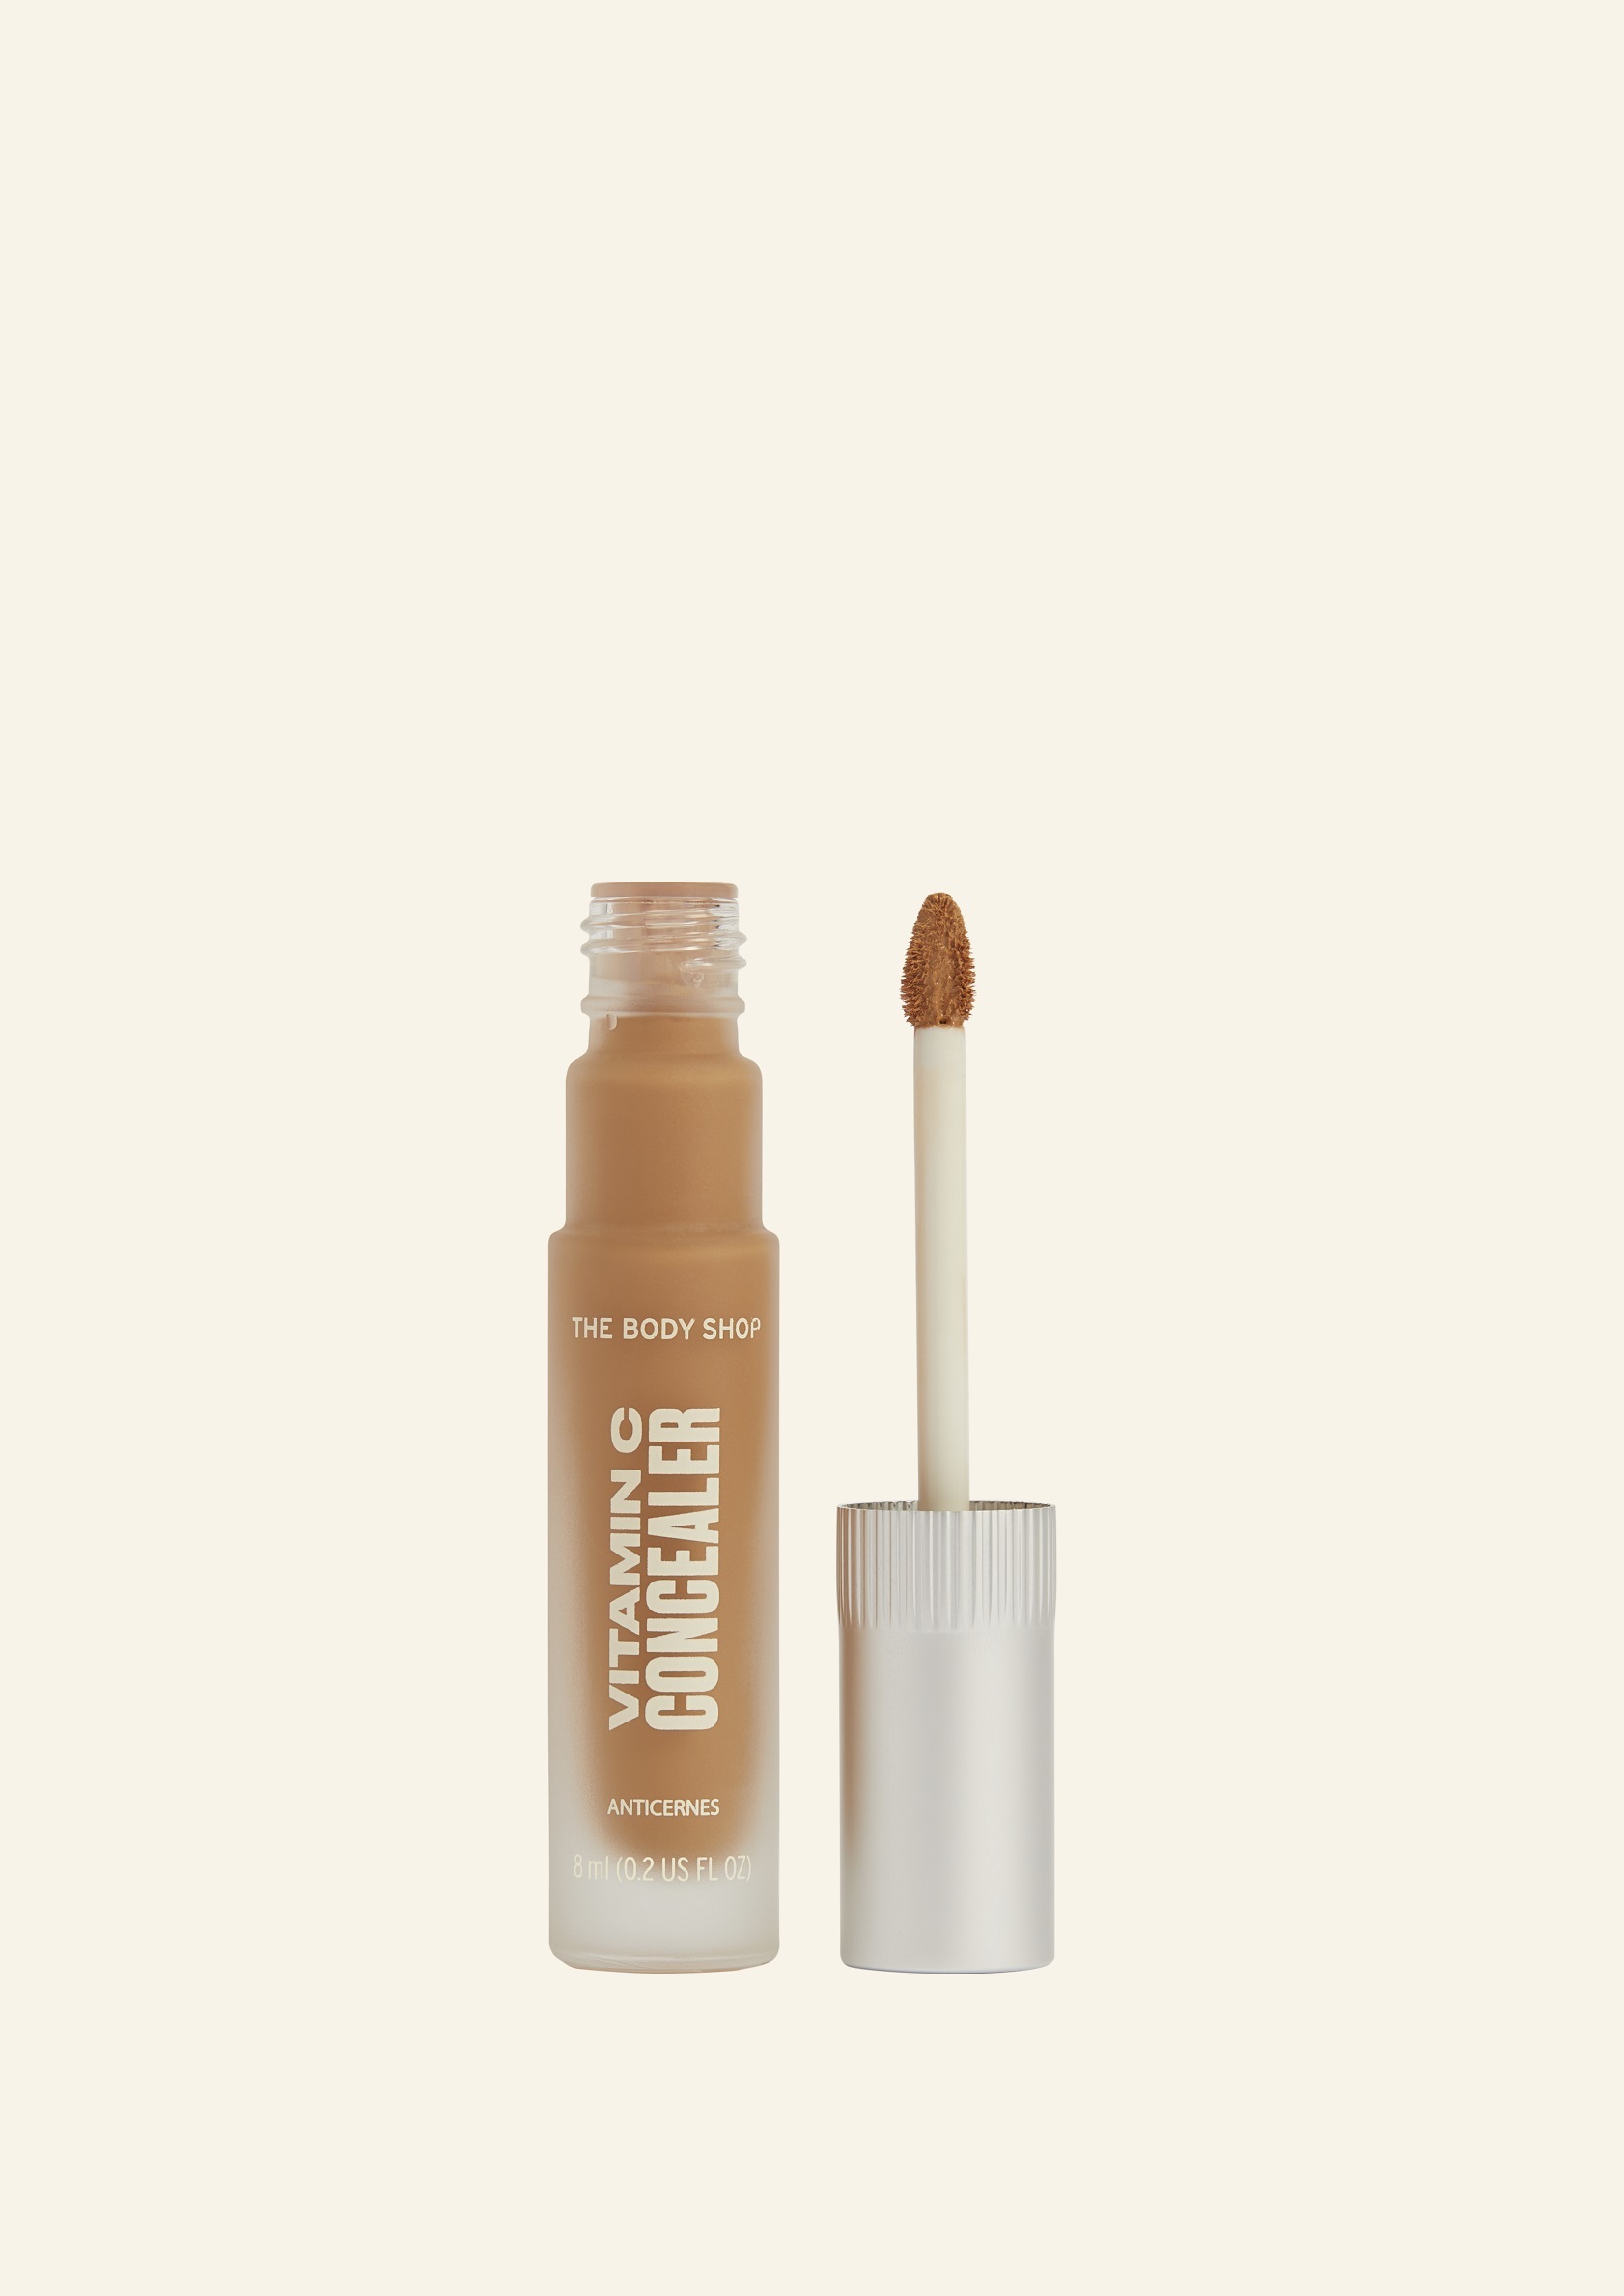 1015334 CONCEALER VITAMIN C TAN 2 W 8 ML A0 X BRONZE NW INABUPS811 brush